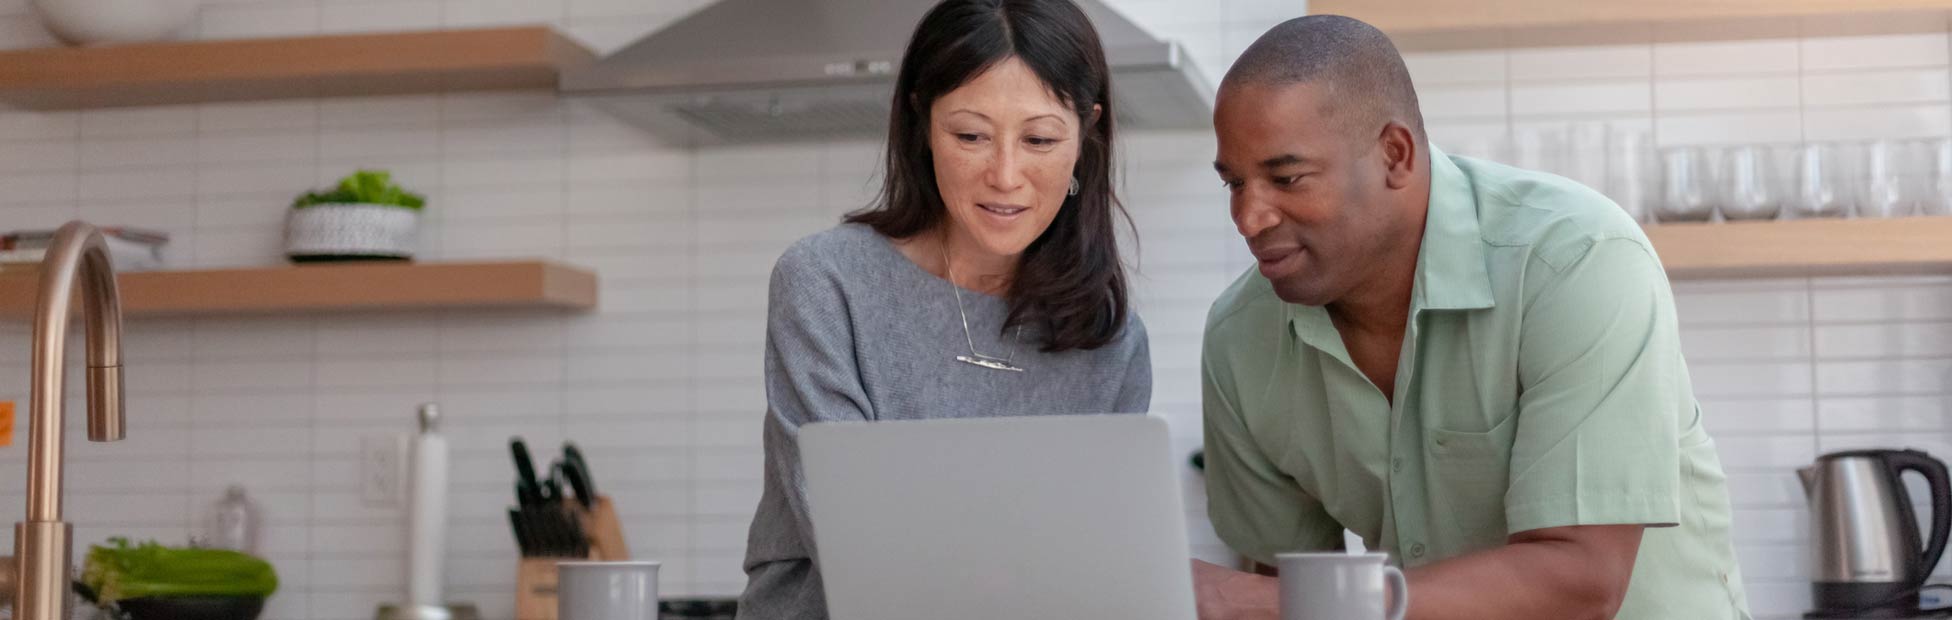 A picture showing a happy middle-aged couple looking at the laptop on their kitchen counter.